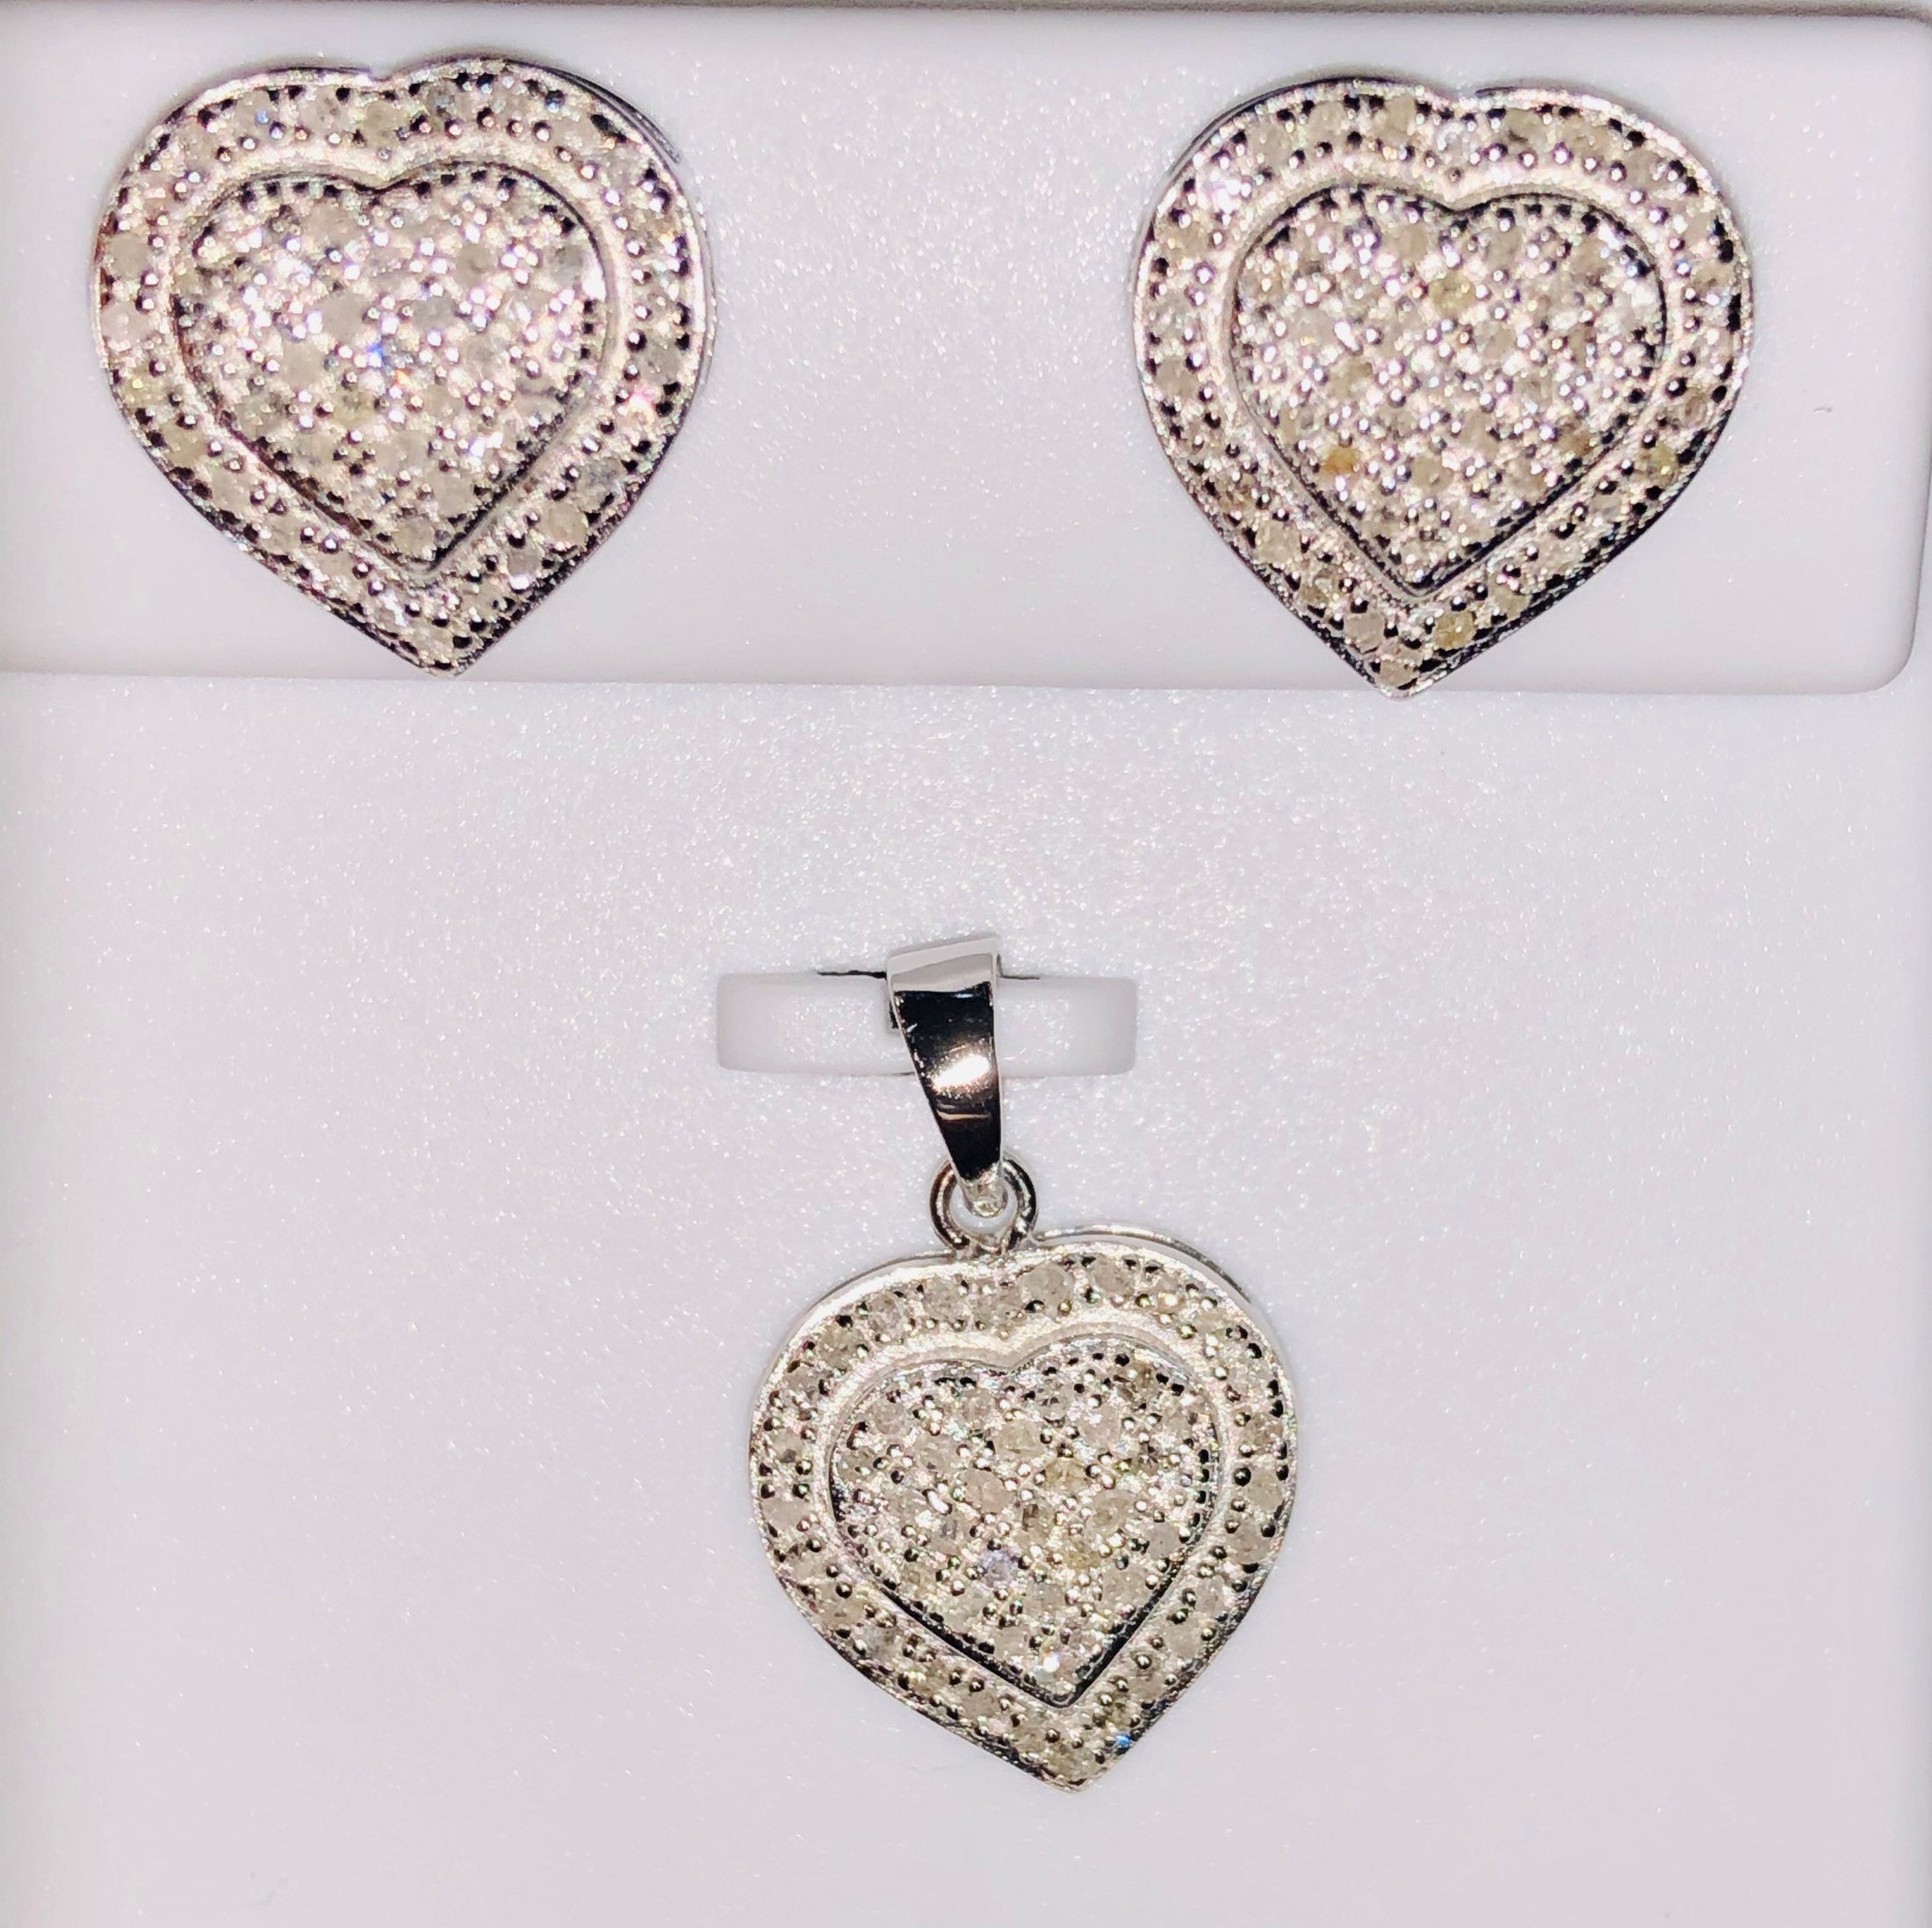 Real Diamond heart pendant and earring set 1/2 carat natural diamonds. Comes with certificate & free gift packaging best gift this holiday